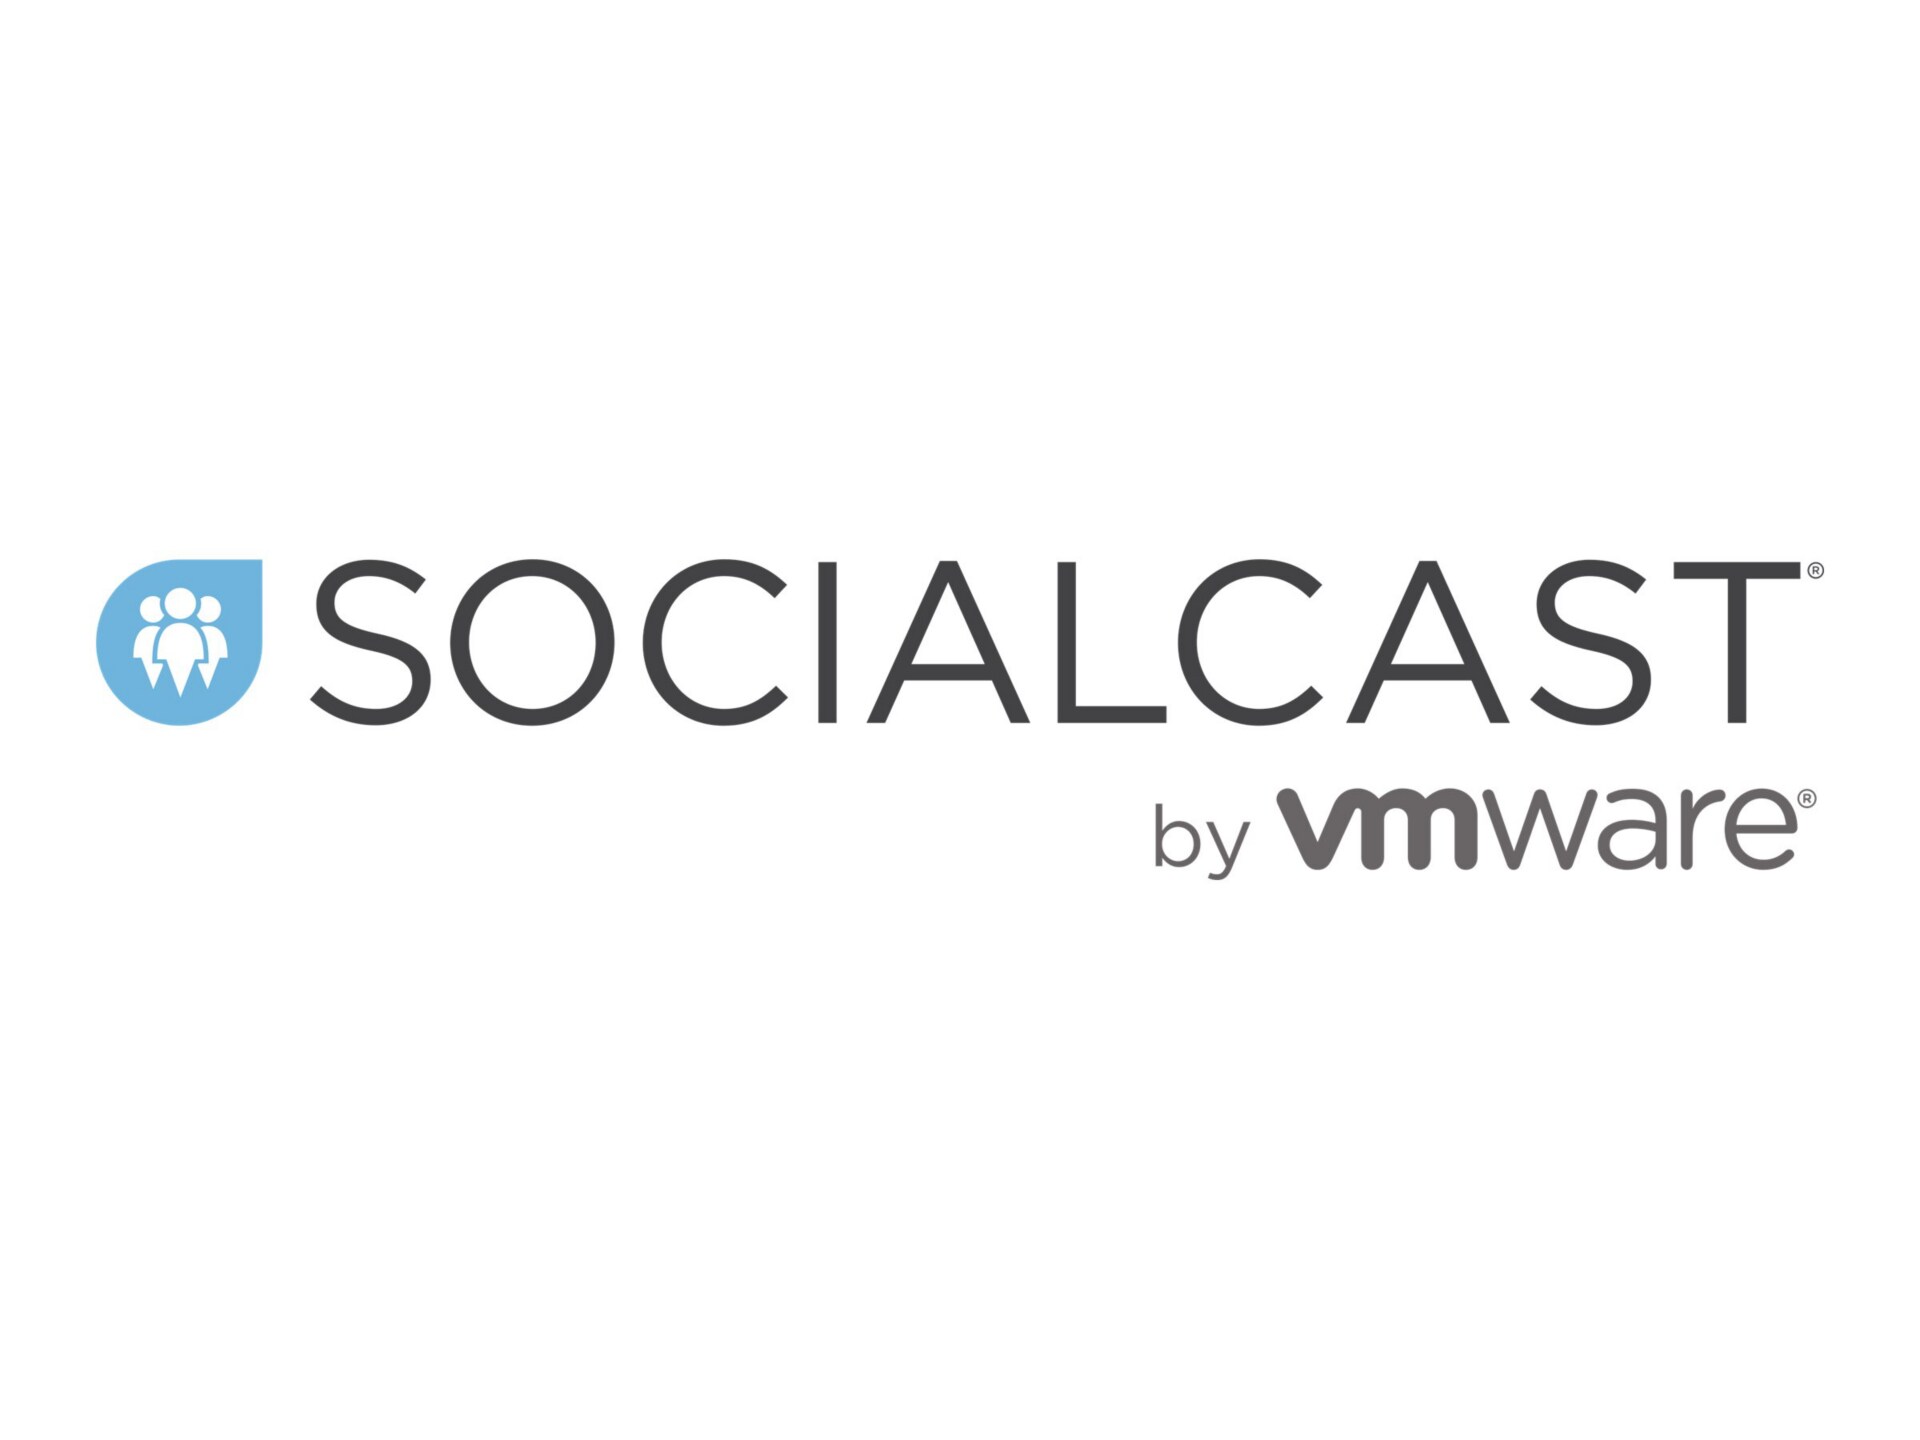 Socialcast External Contributor Add On - Term License (2 years) + 2 Years V